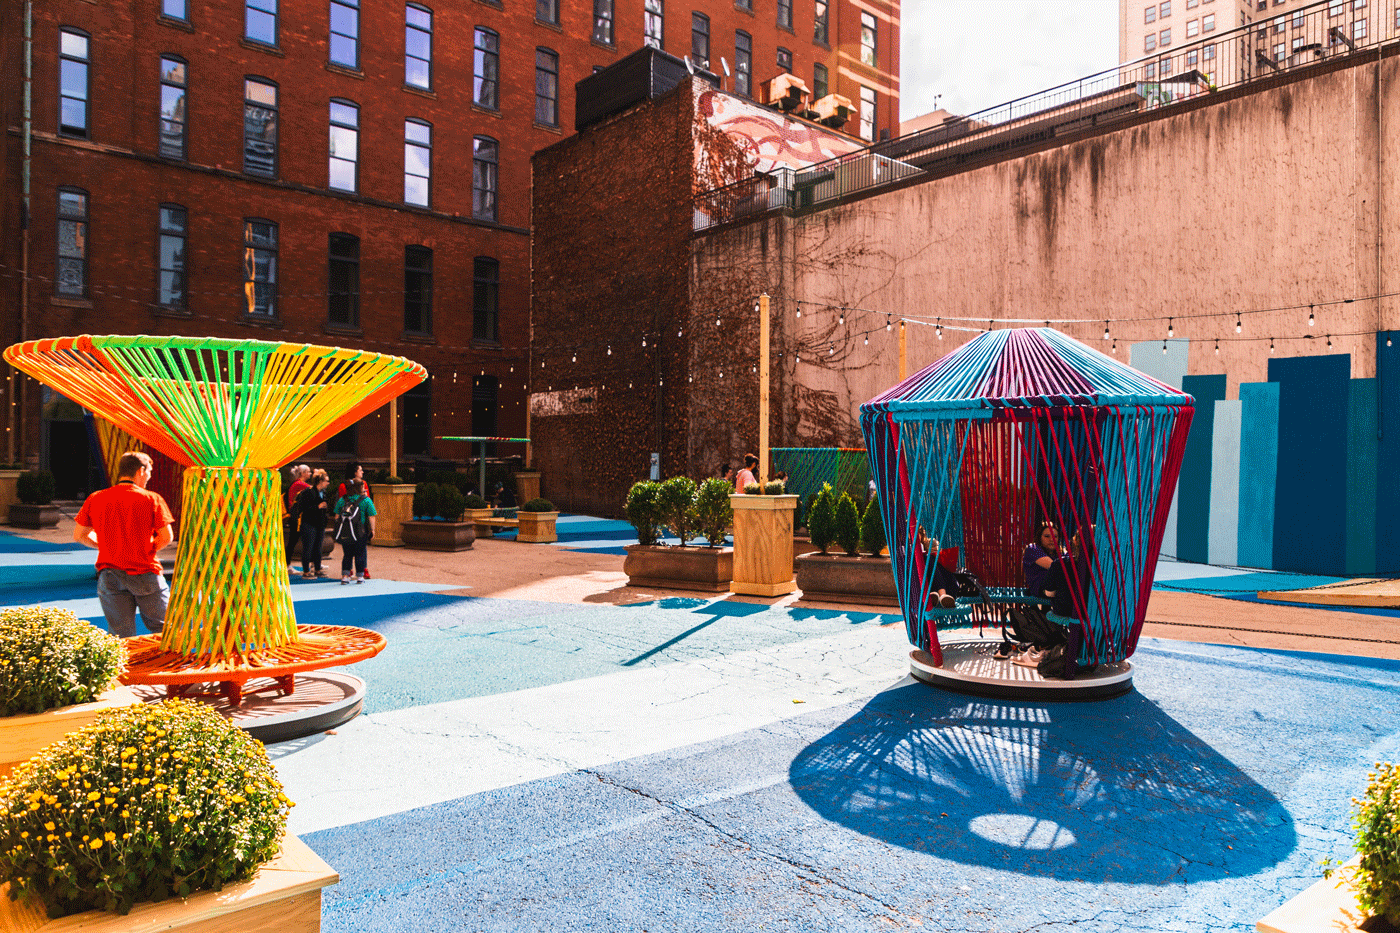 Multicolored, string, seating art pieces in a blue painted courtyard